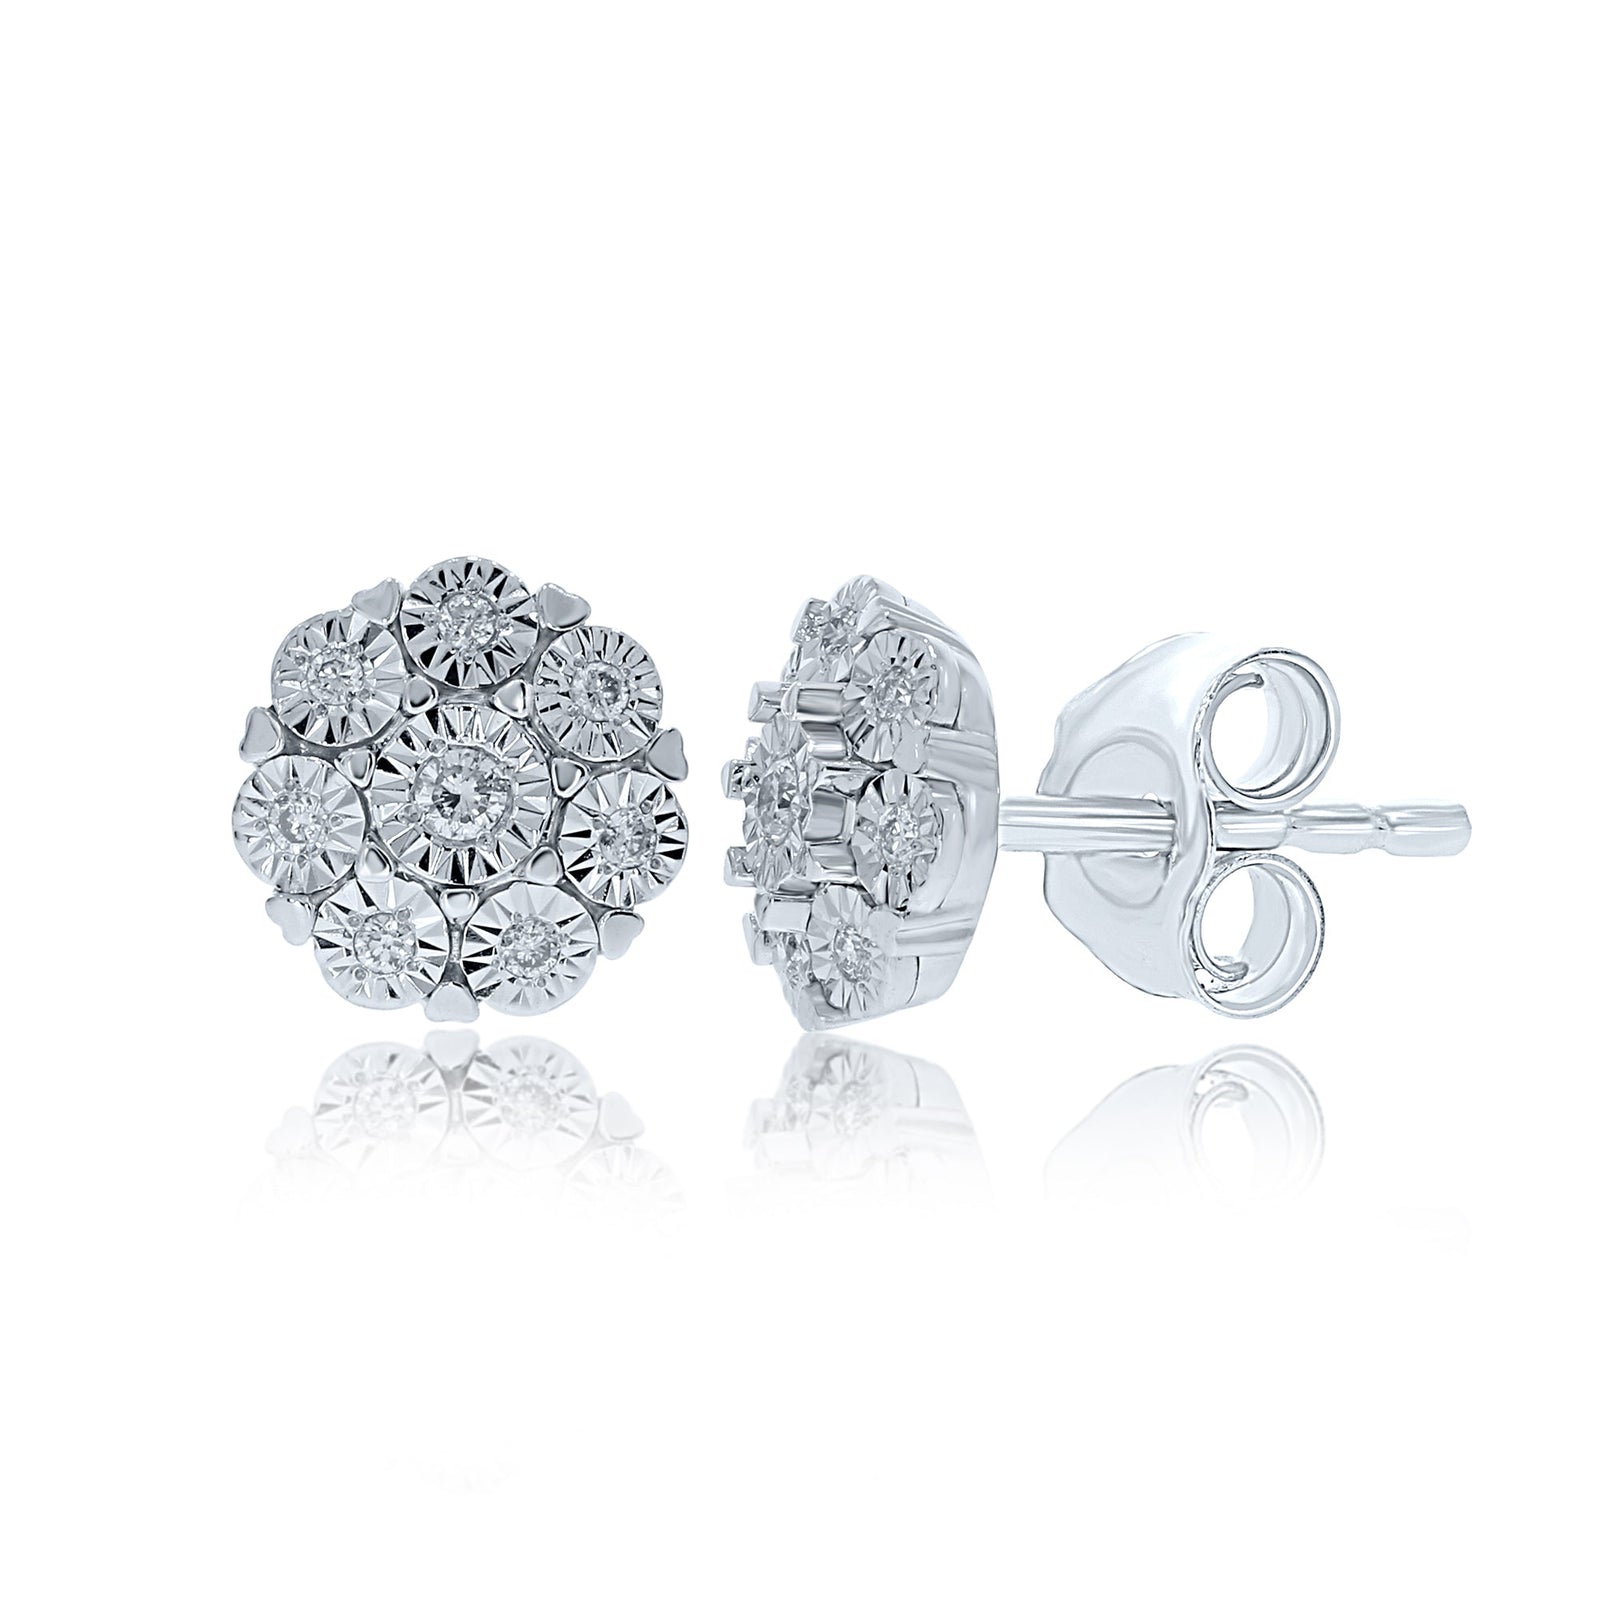 9ct white gold miracle plate diamond set cluster stud earrings 0.08ct